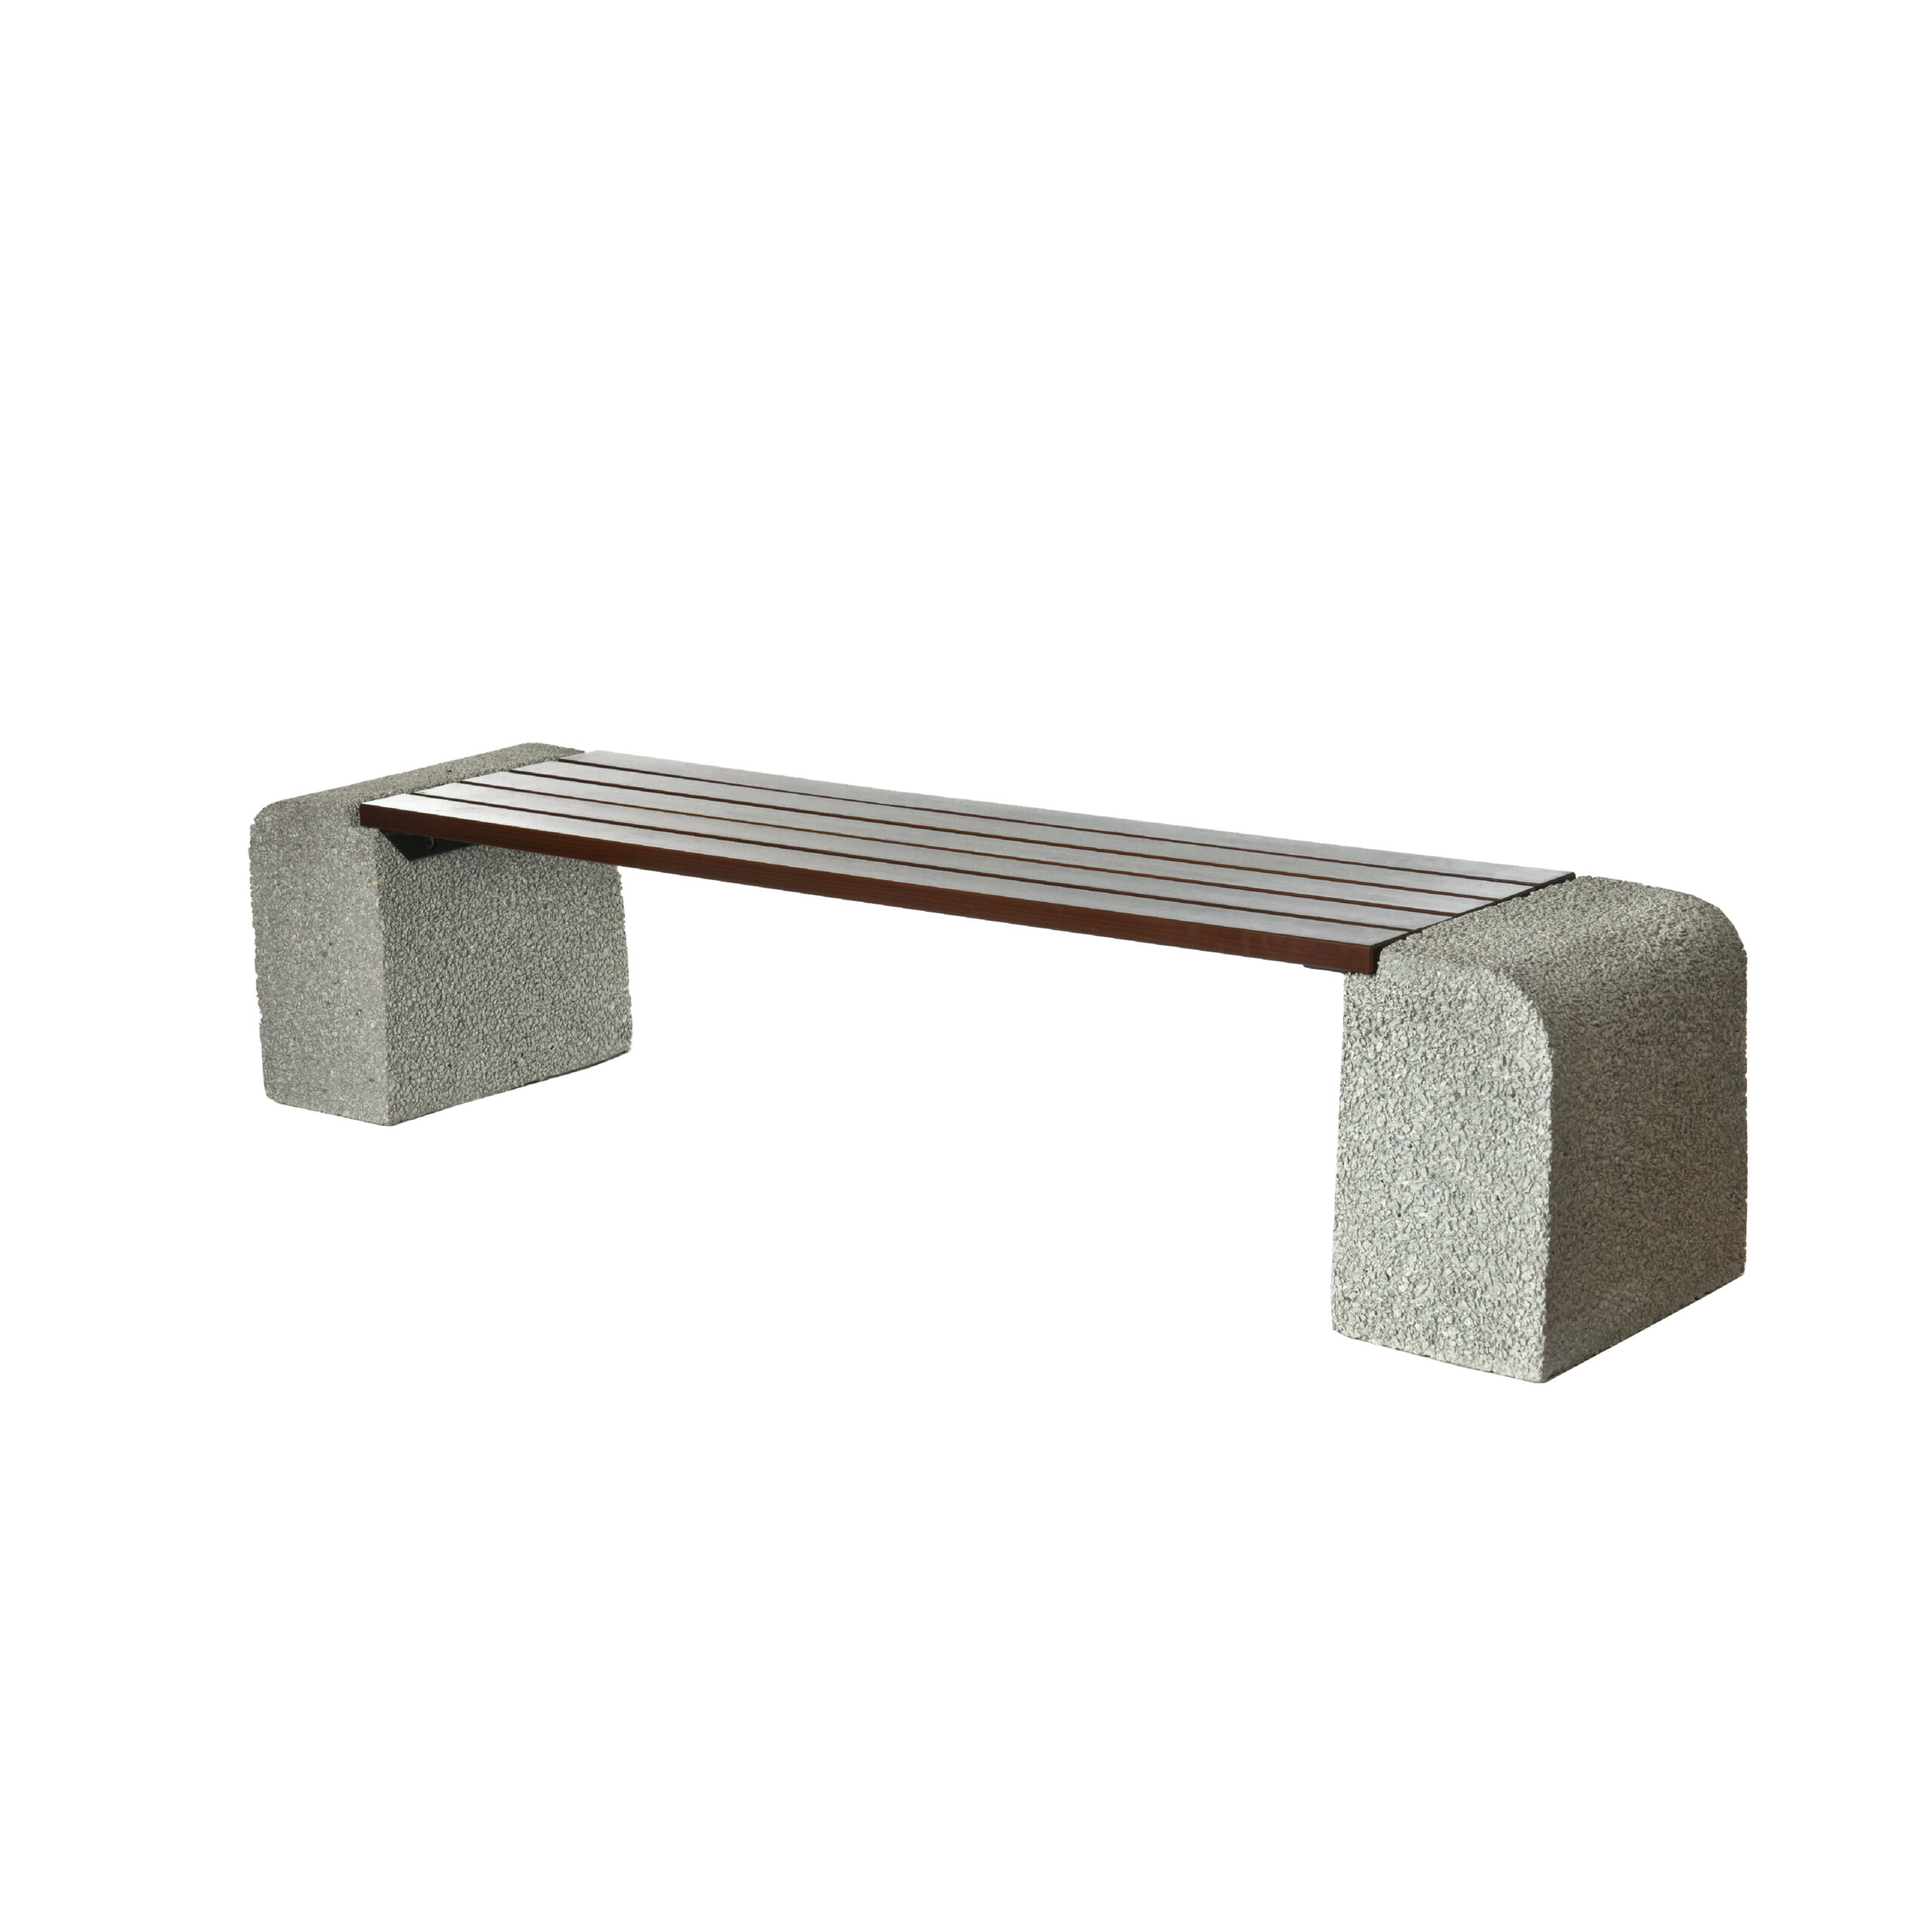 Concrete bench without backrest